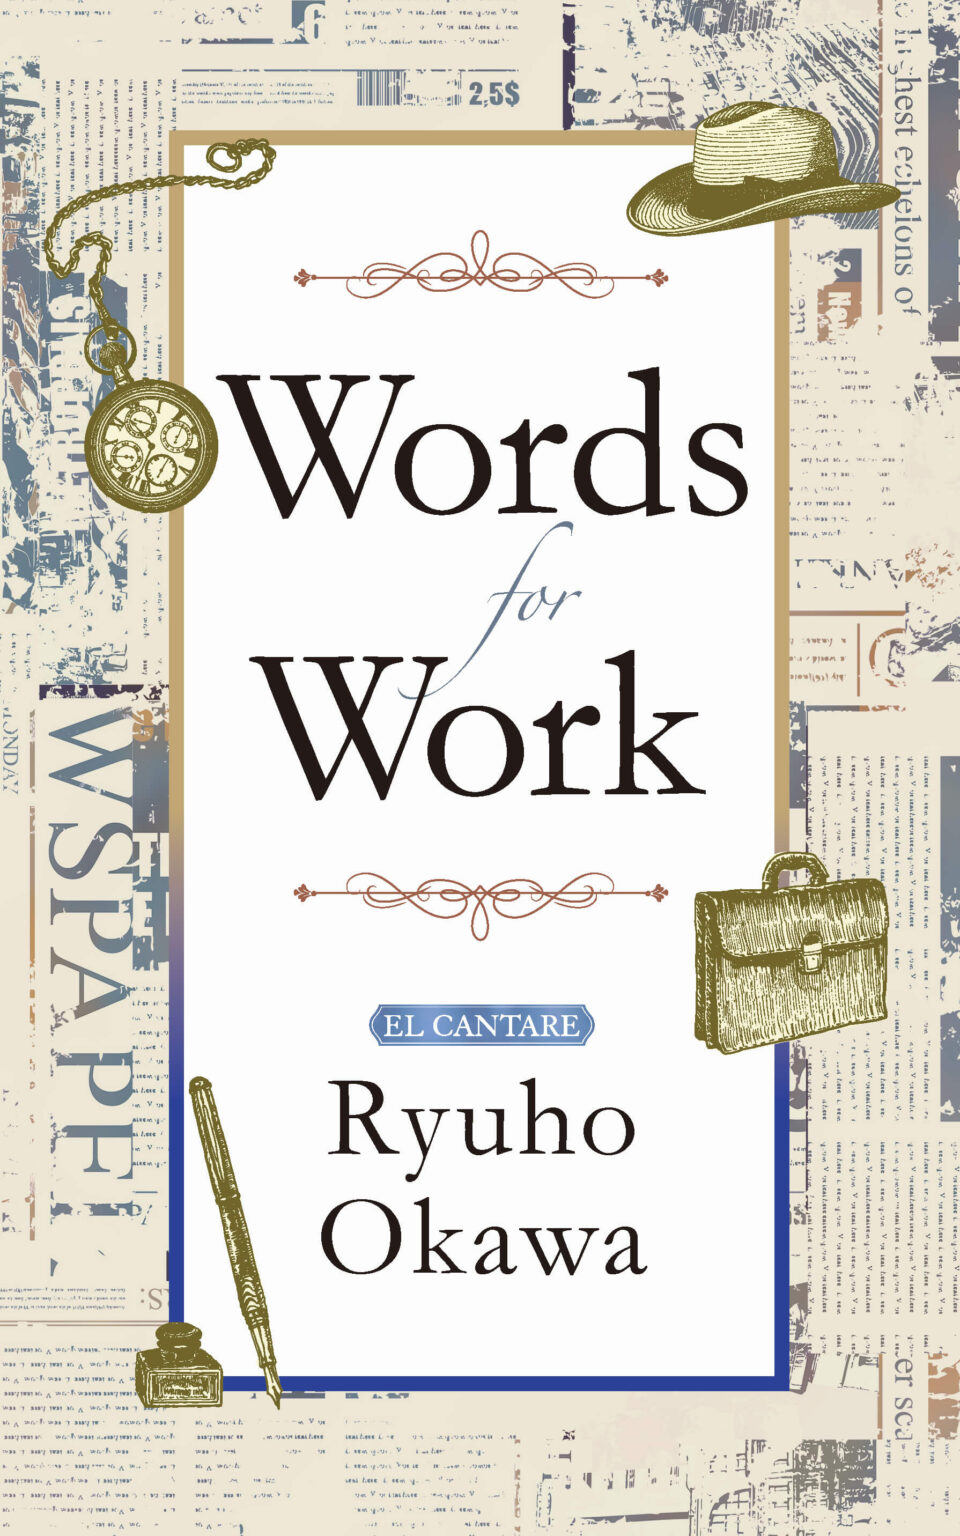 Words for Work is out now!